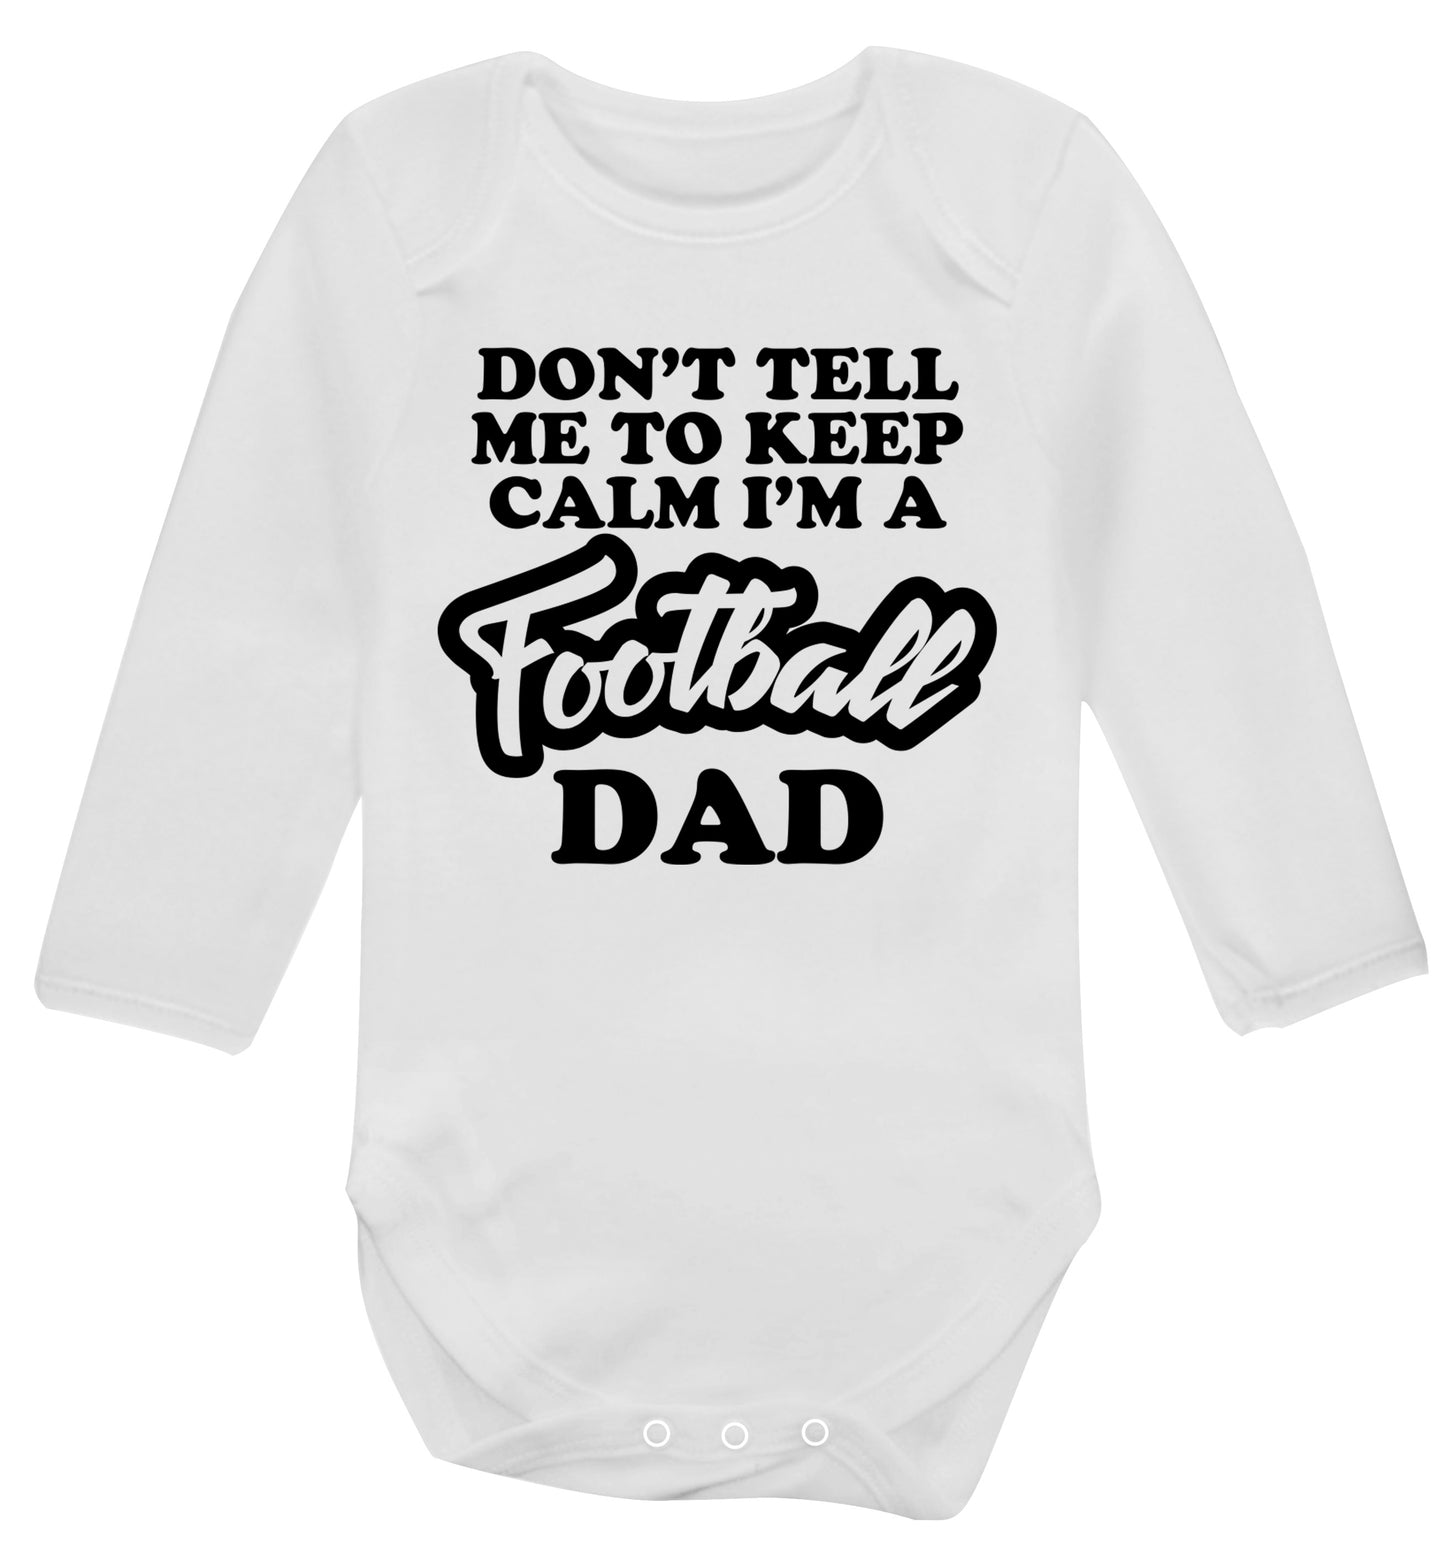 Don't tell me to keep calm I'm a football grandad Baby Vest long sleeved white 6-12 months